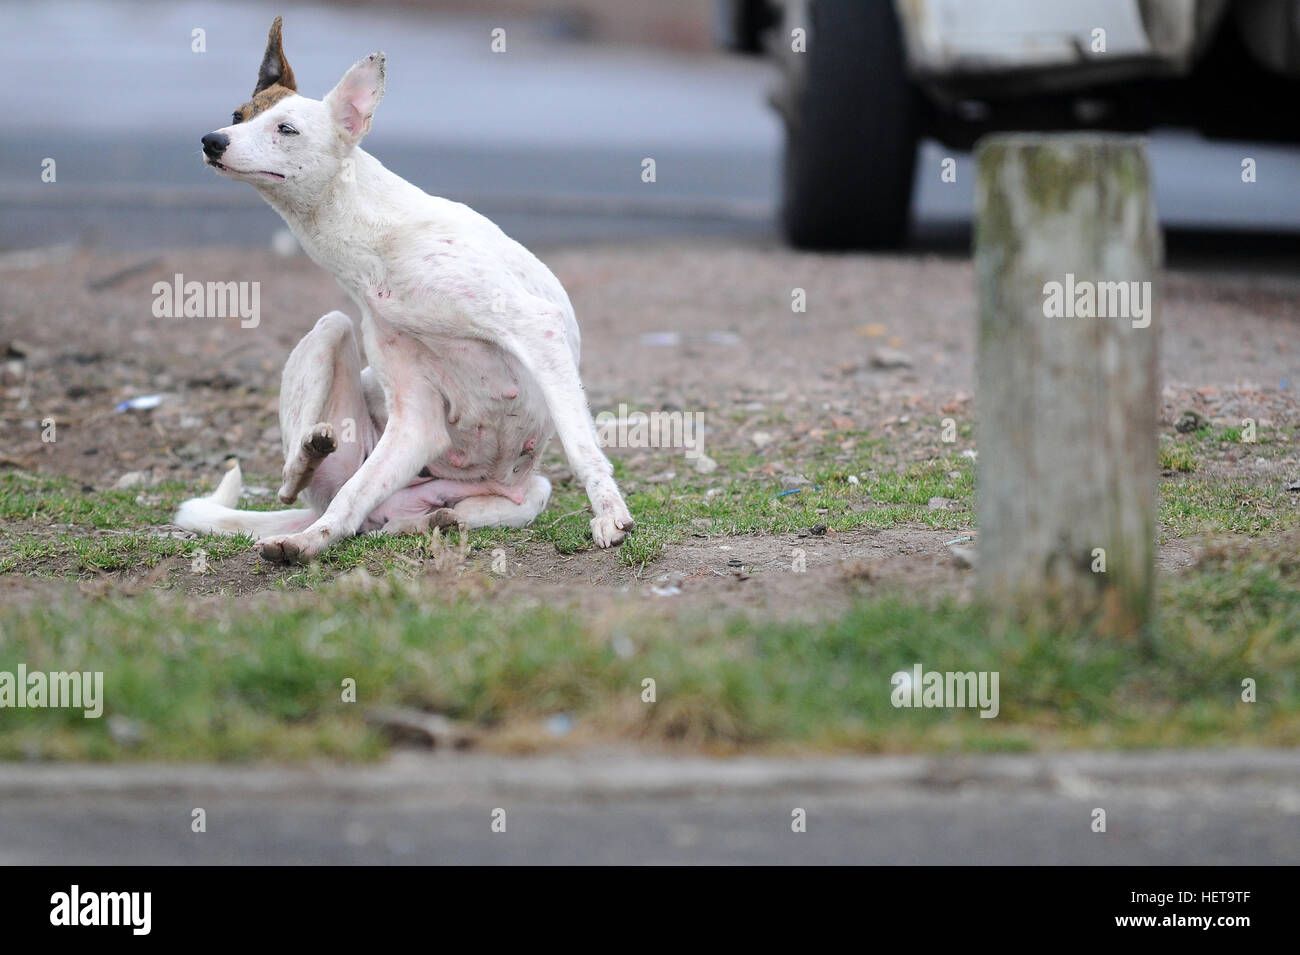 A scrawny scabby dog itches fleas from its body. Stock Photo